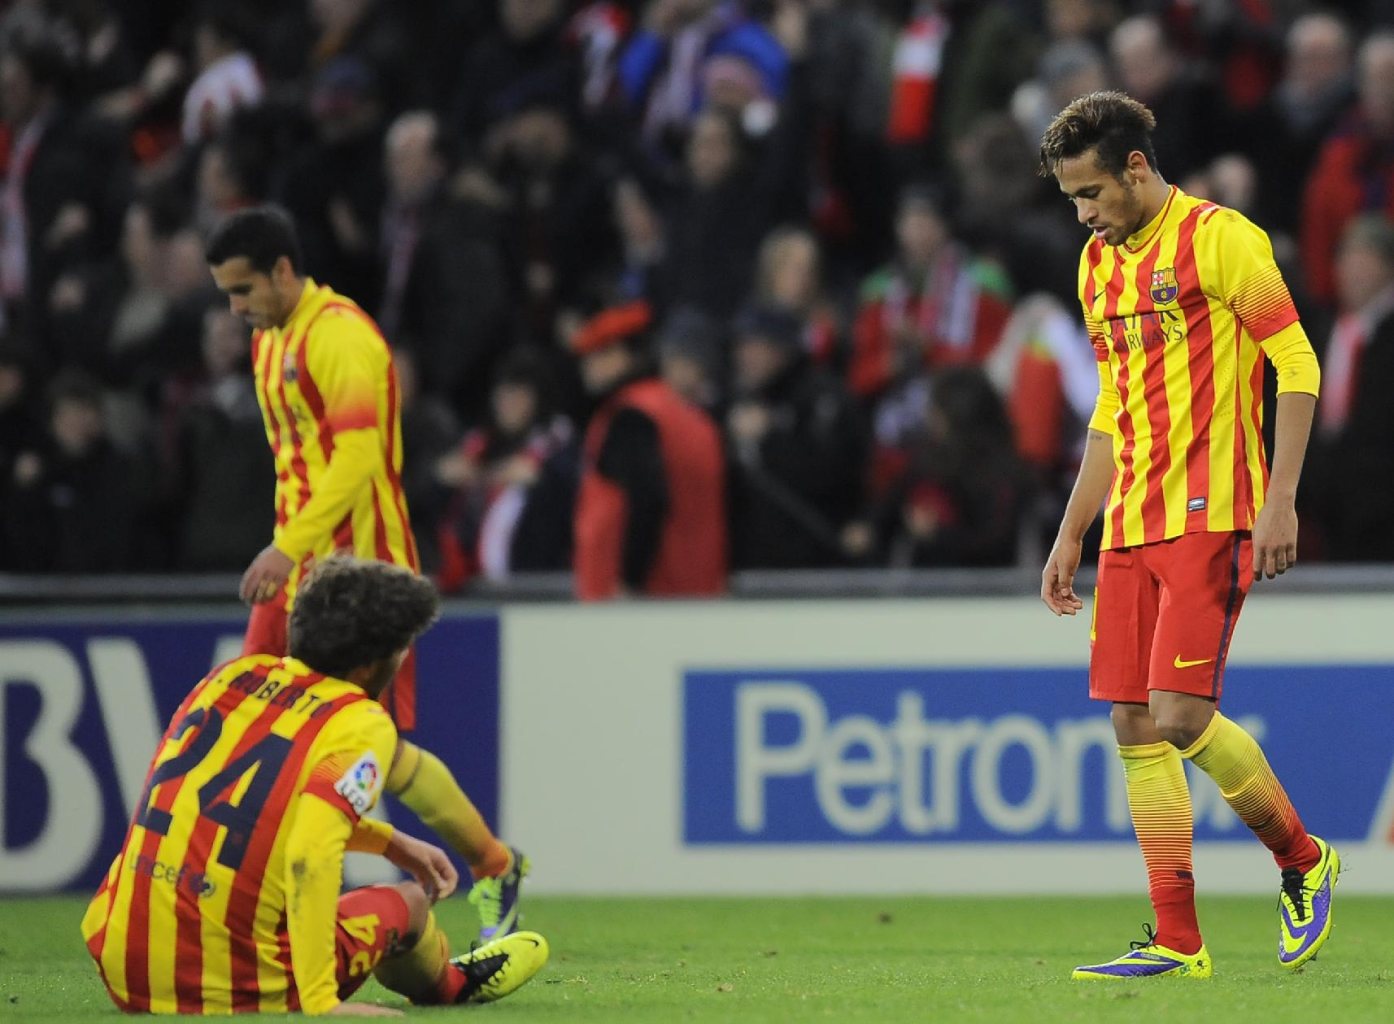 Neymar dropping his head down, after a Barcelona loss in 2013